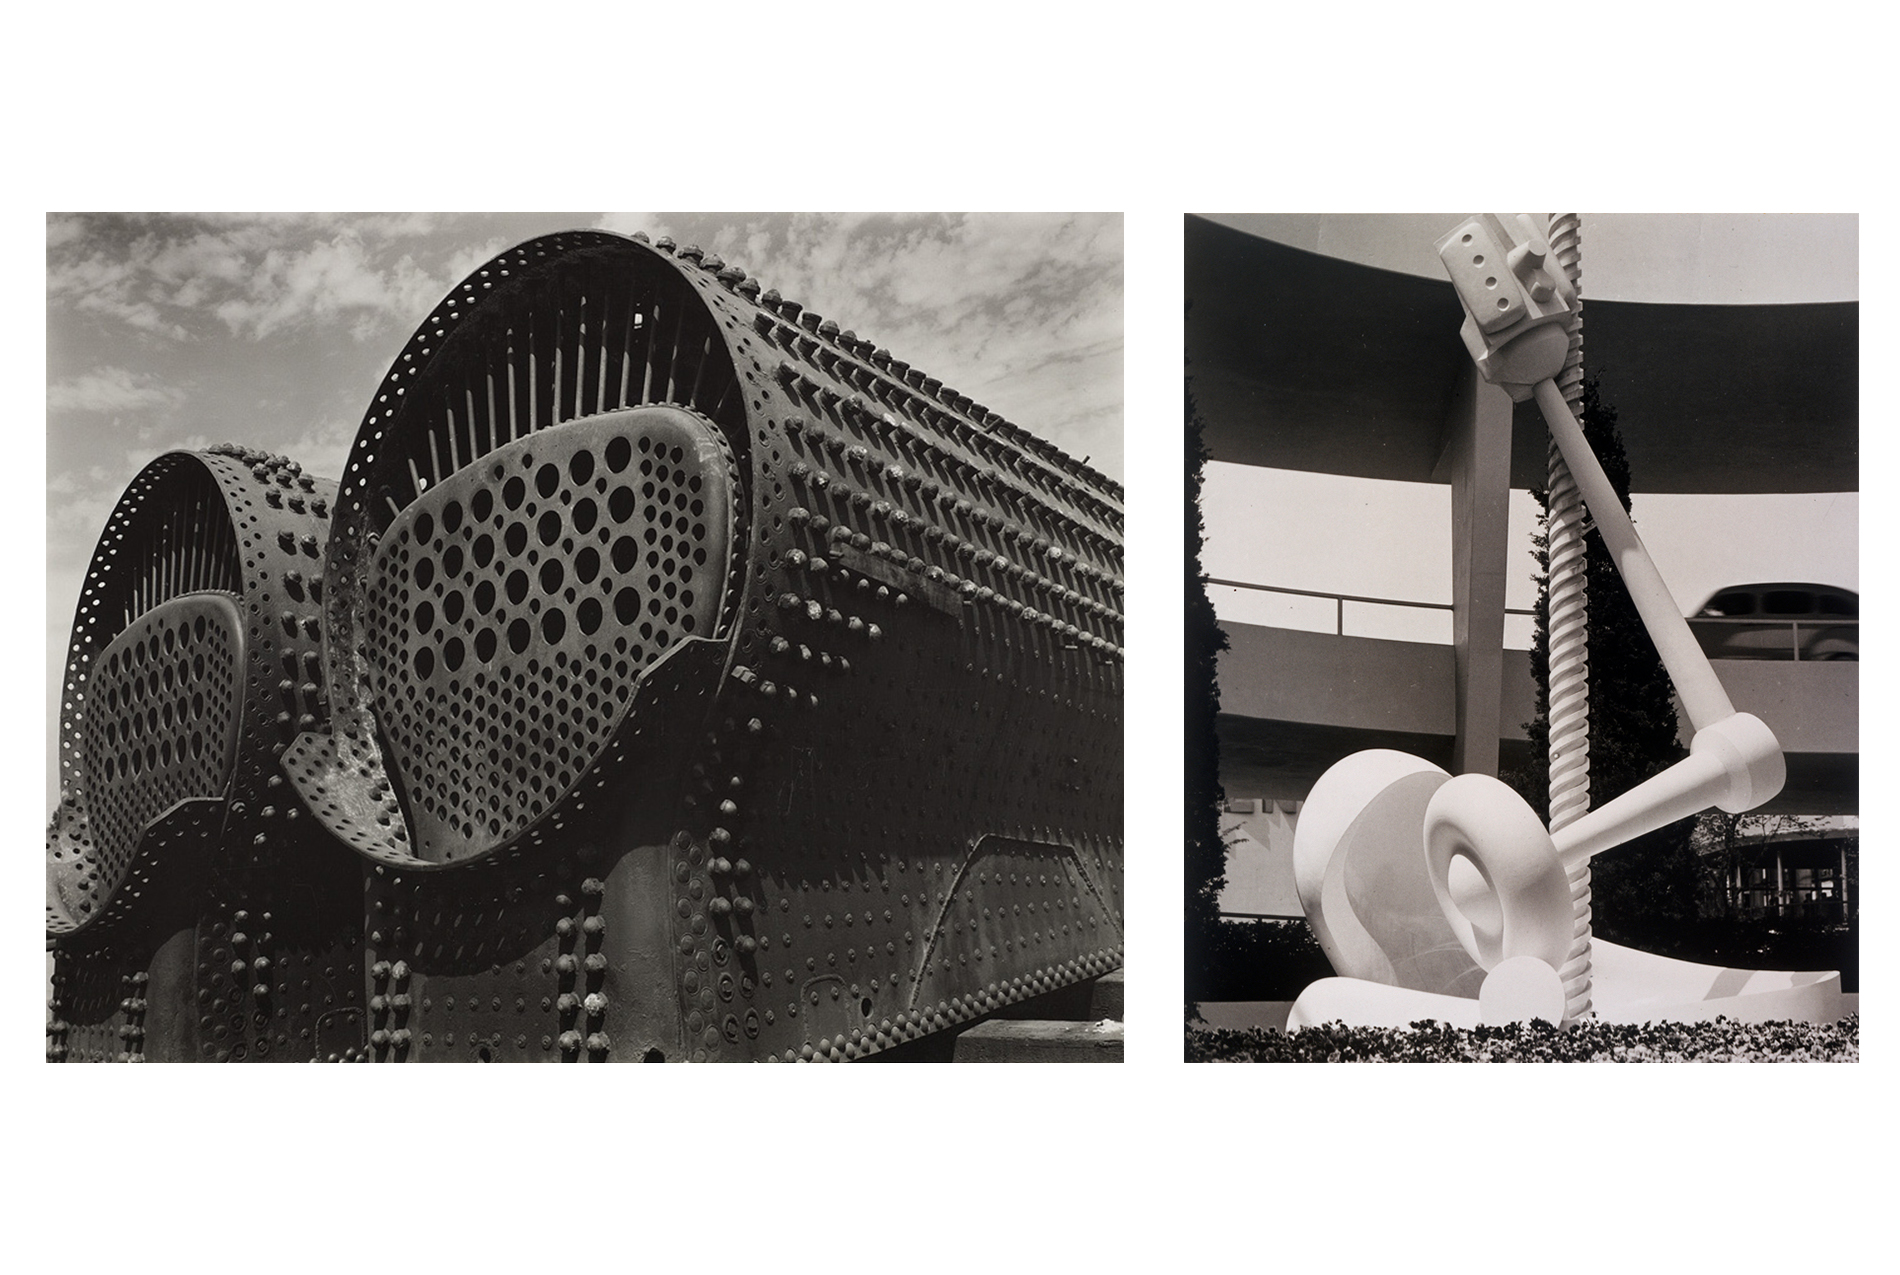 left: sky with white puffy clouds, close-up of round ends of two segments of machinery; right: abstract sculpture in natural setting